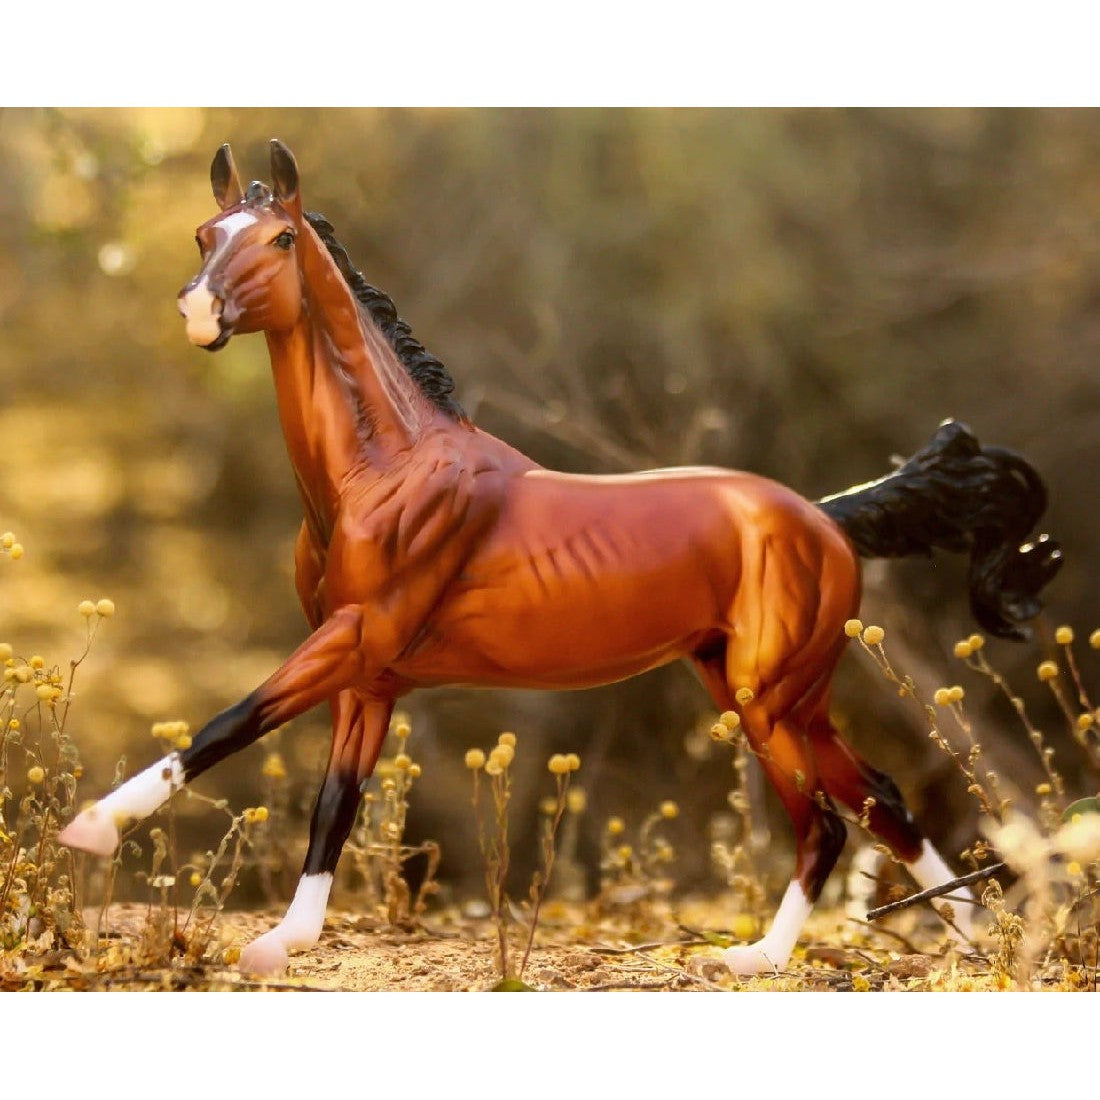 Breyer Horse Toy detailed model in outdoor naturalistic setting.